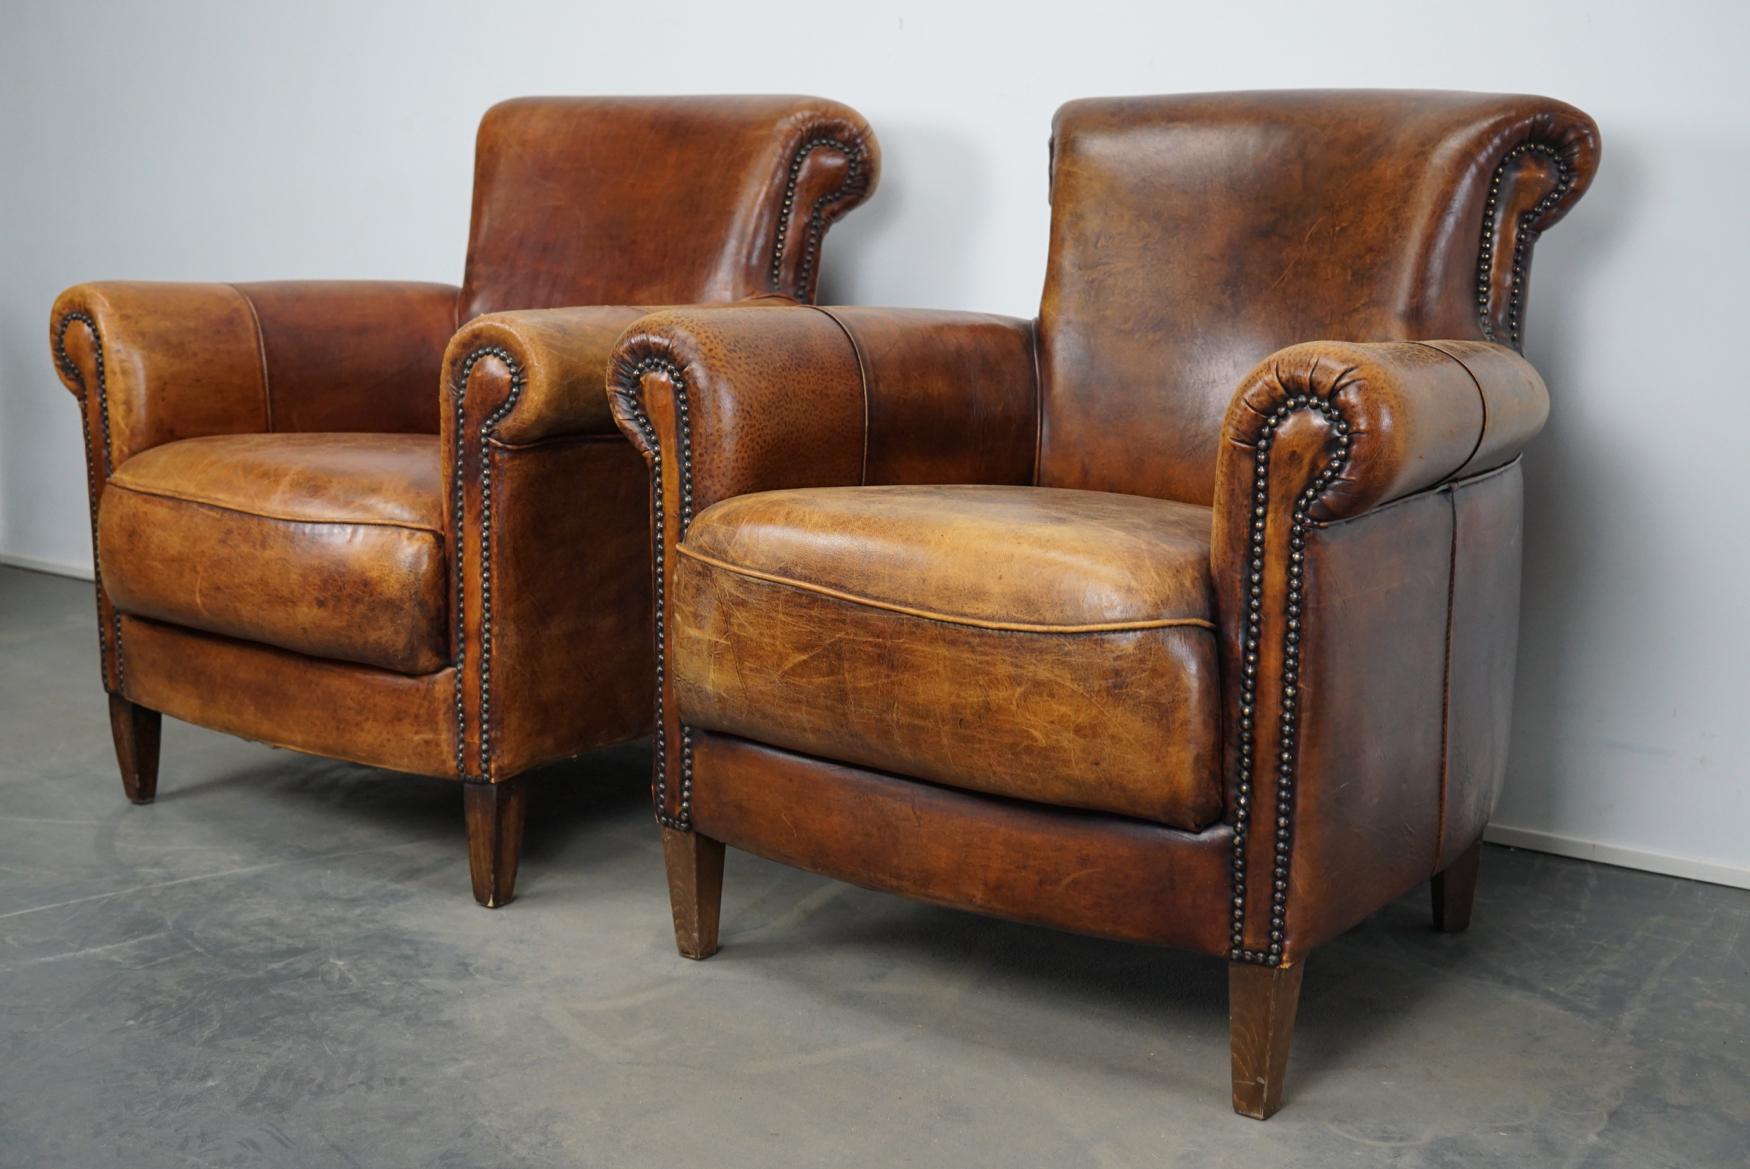 Industrial Vintage Dutch Cognac Leather Club Chairs, Set of 2